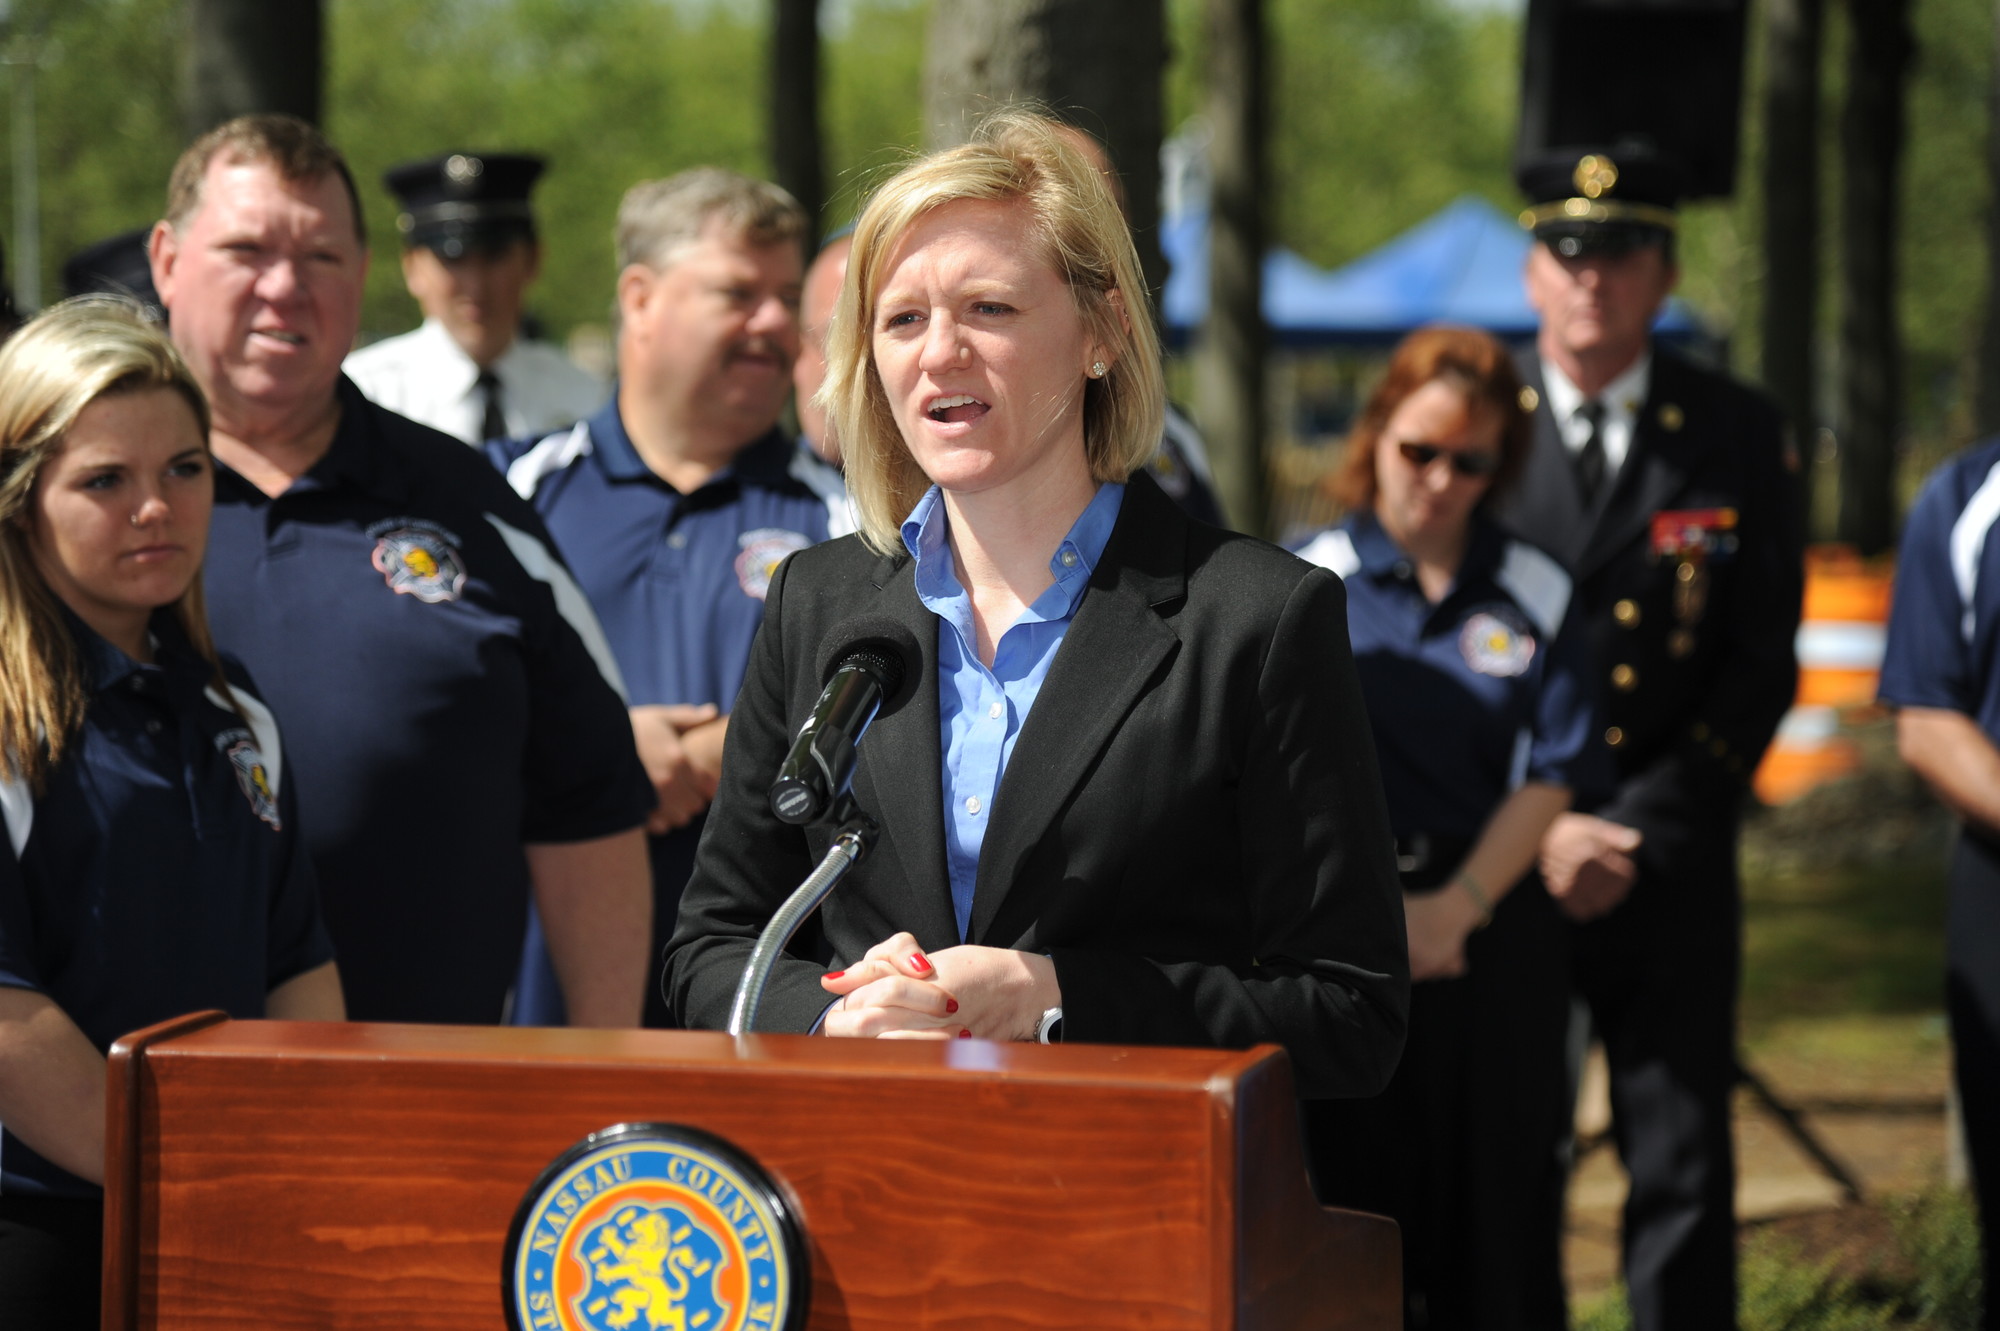 Rachel Buczynski of the National Volunteer Fire Council, spoke at the ceremony.